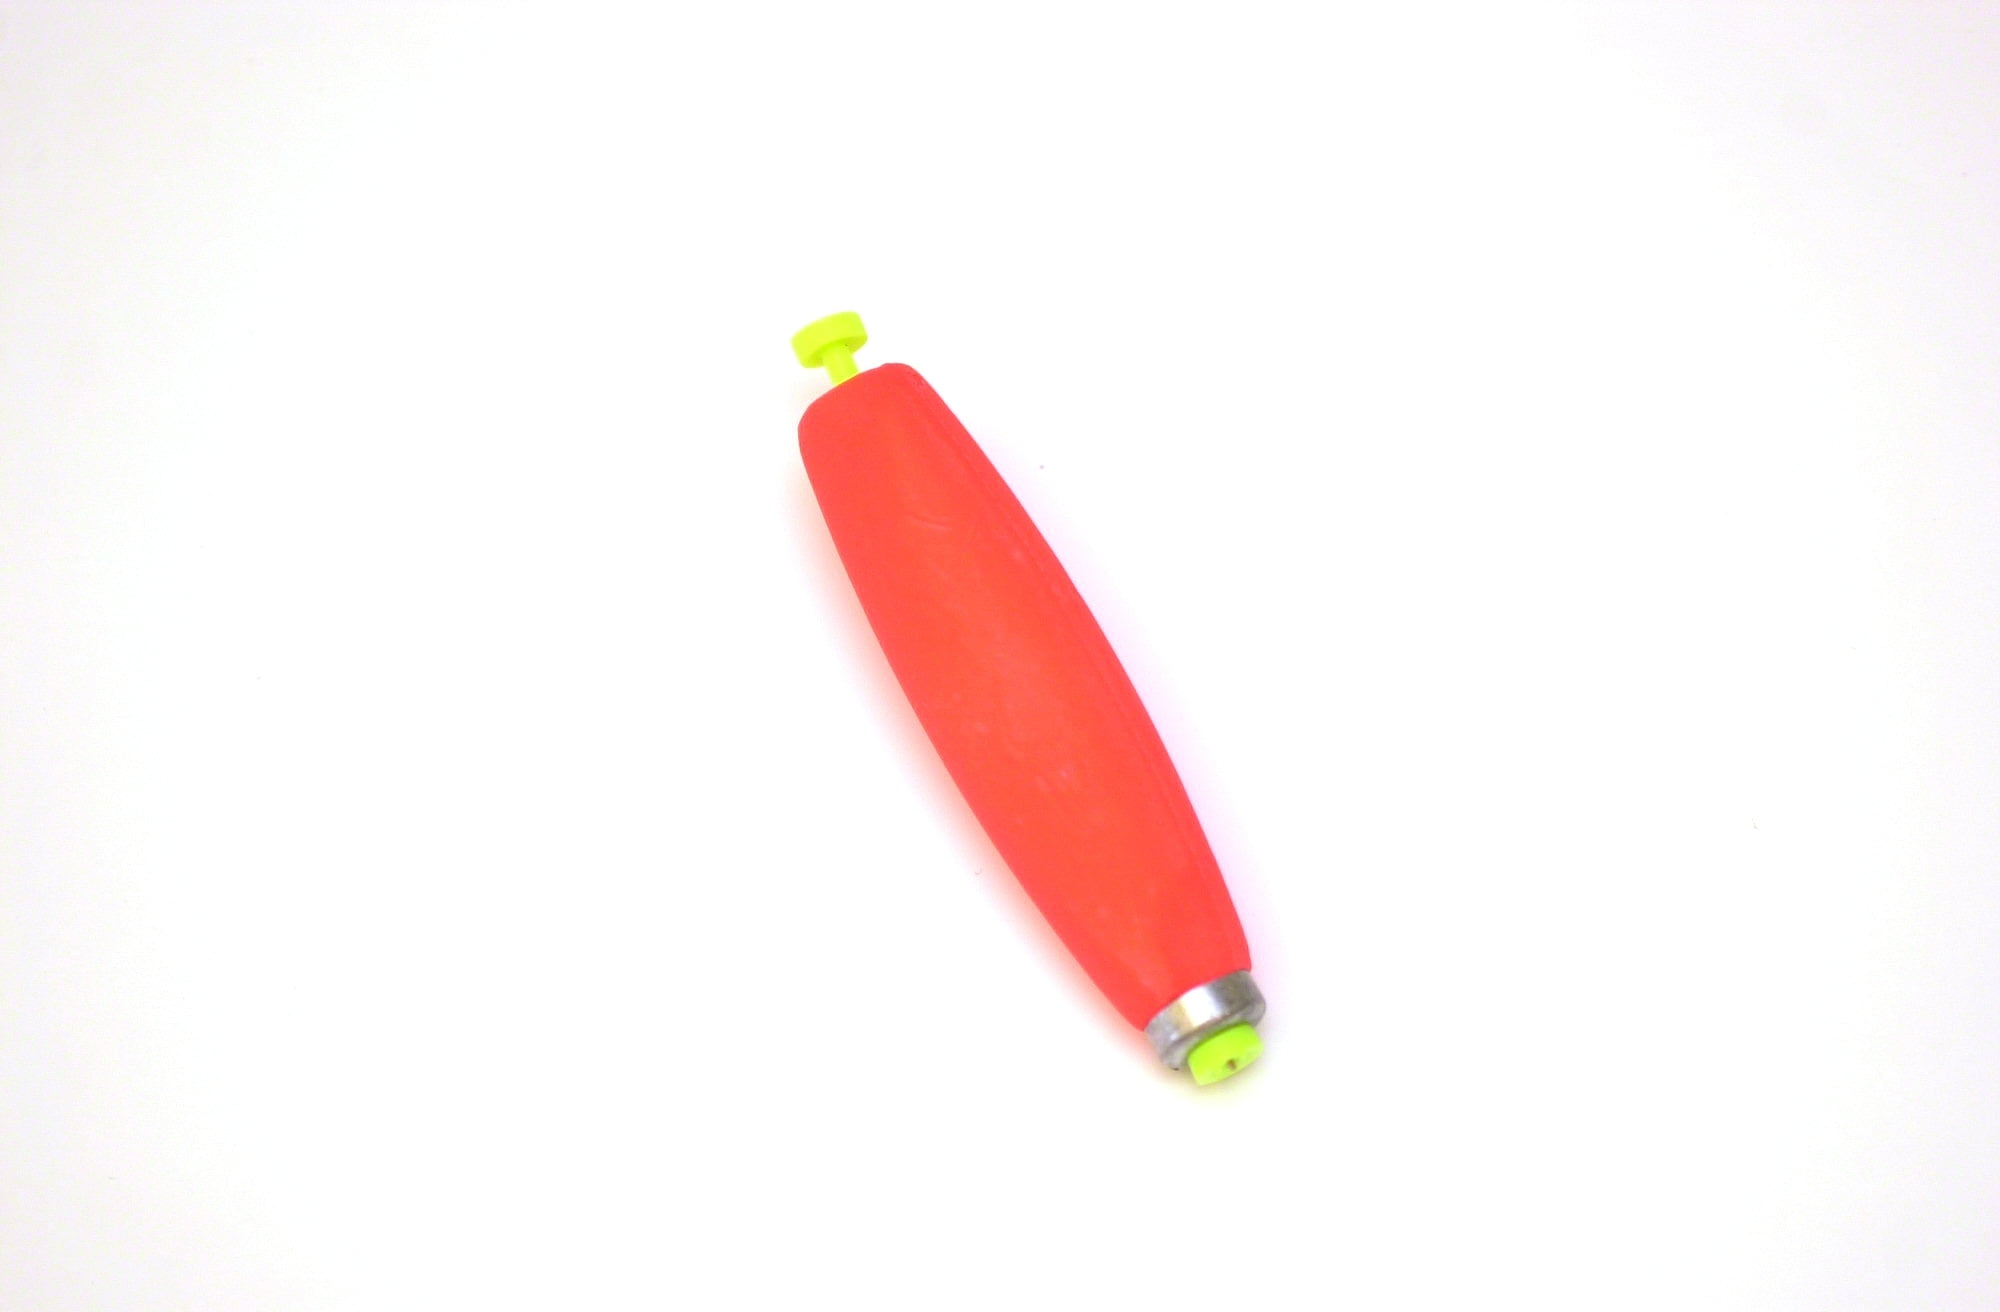 12 1.50" FISHING BOBBERS Cigar Floats Flo-Chartreuse Weighted Foam Snap on Float 